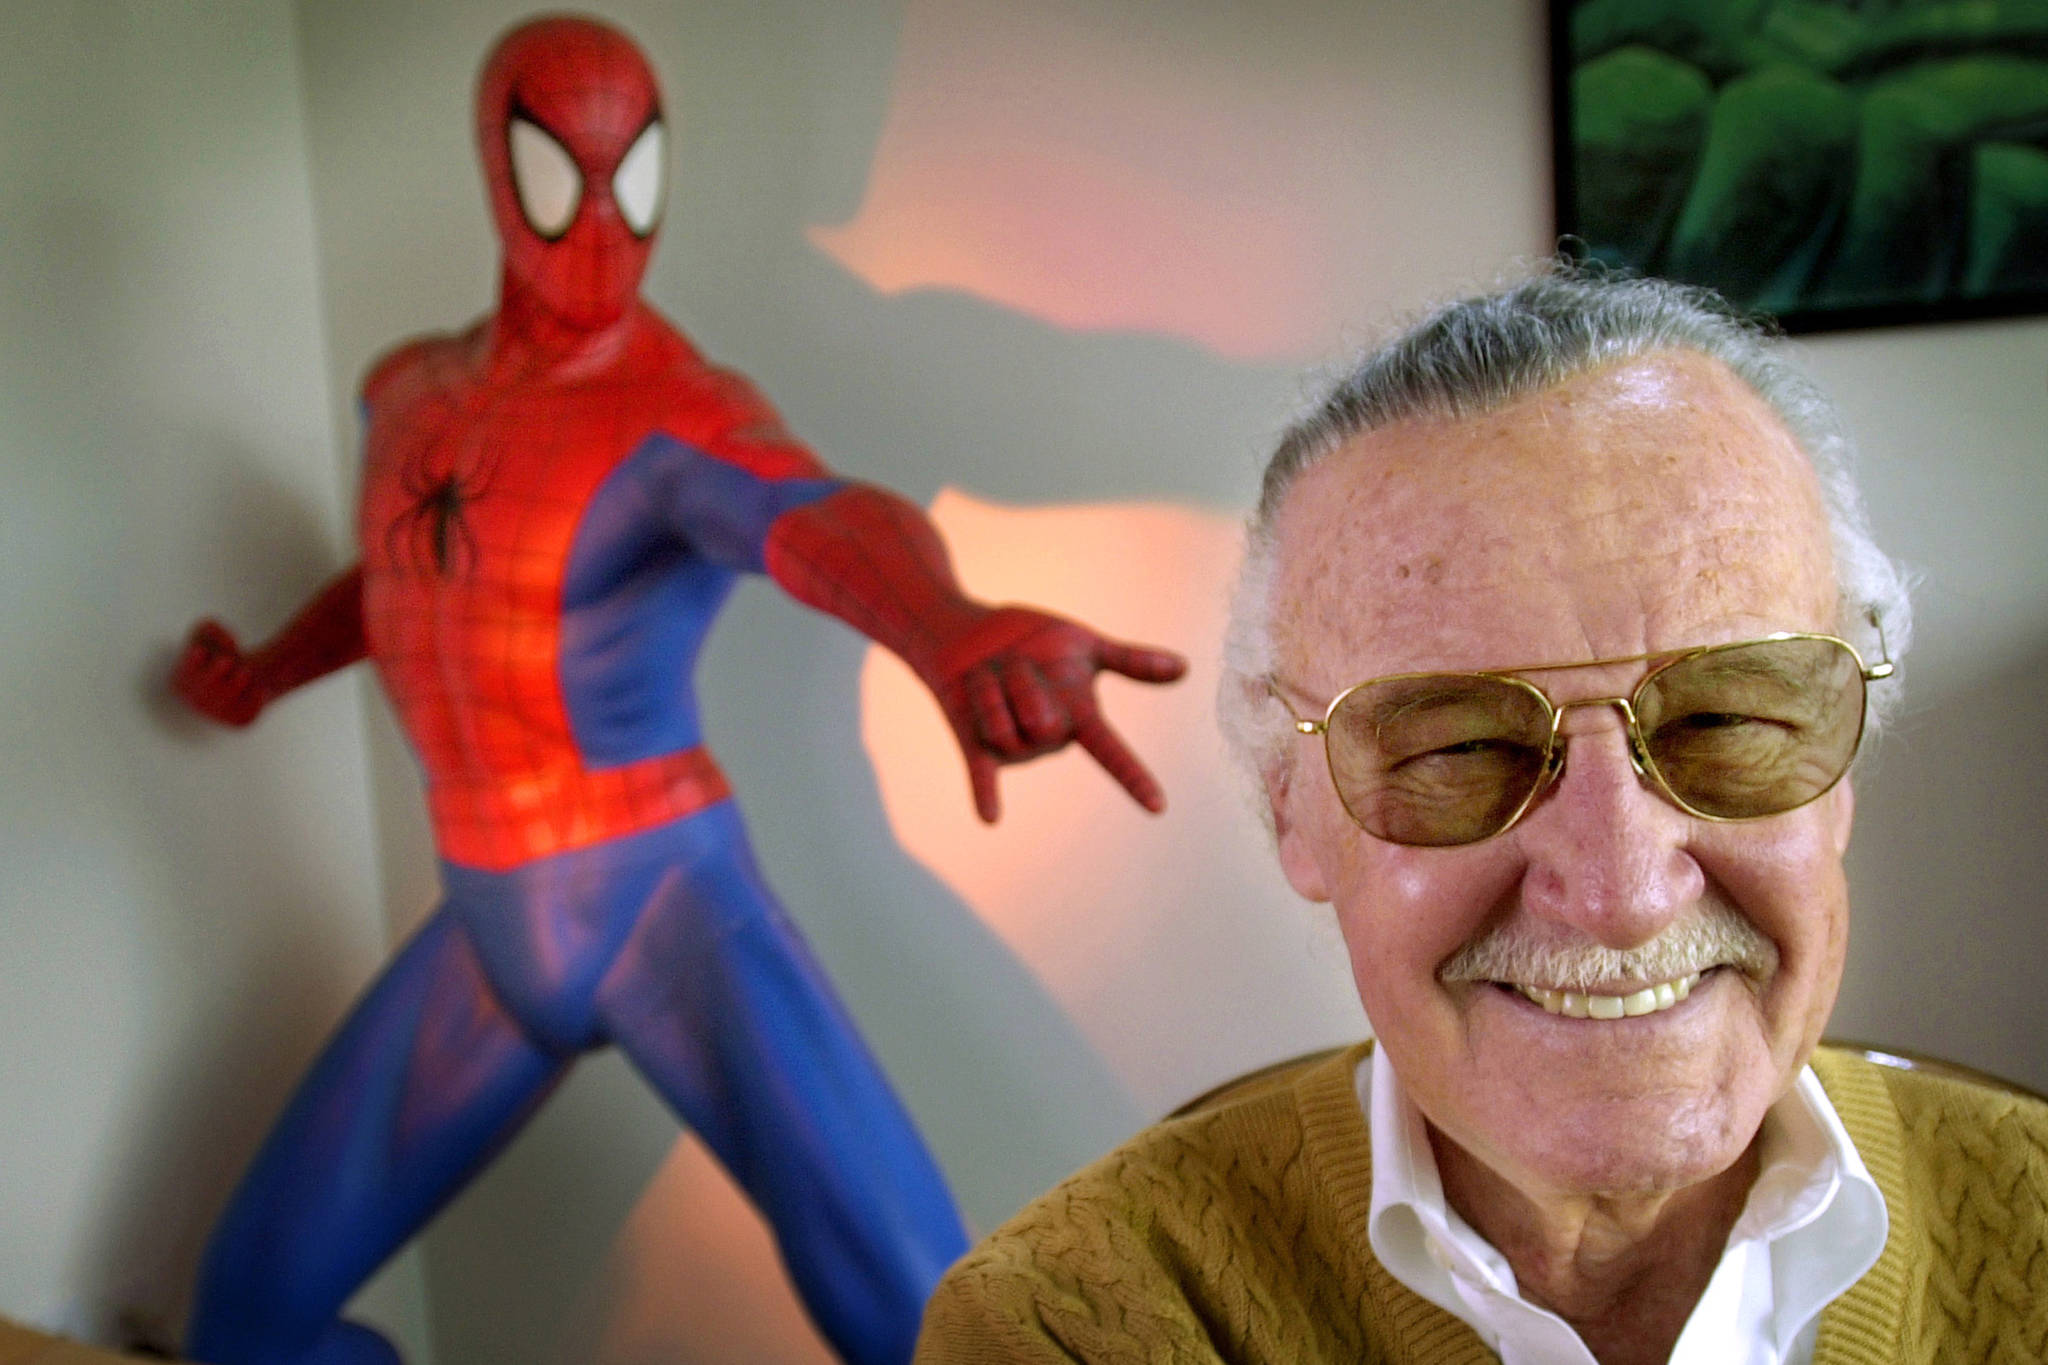 In this April 16, 2002 photo, Stan Lee, creator of comic-book franchises such as “Spider-Man,” “The Incredible Hulk” and “X-Men,” smiles during a photo session in his office in Santa Monica, California. Comic book genius Lee, the architect of the contemporary comic book, has died. He was 95. (Reed Saxon | Associated Press File)